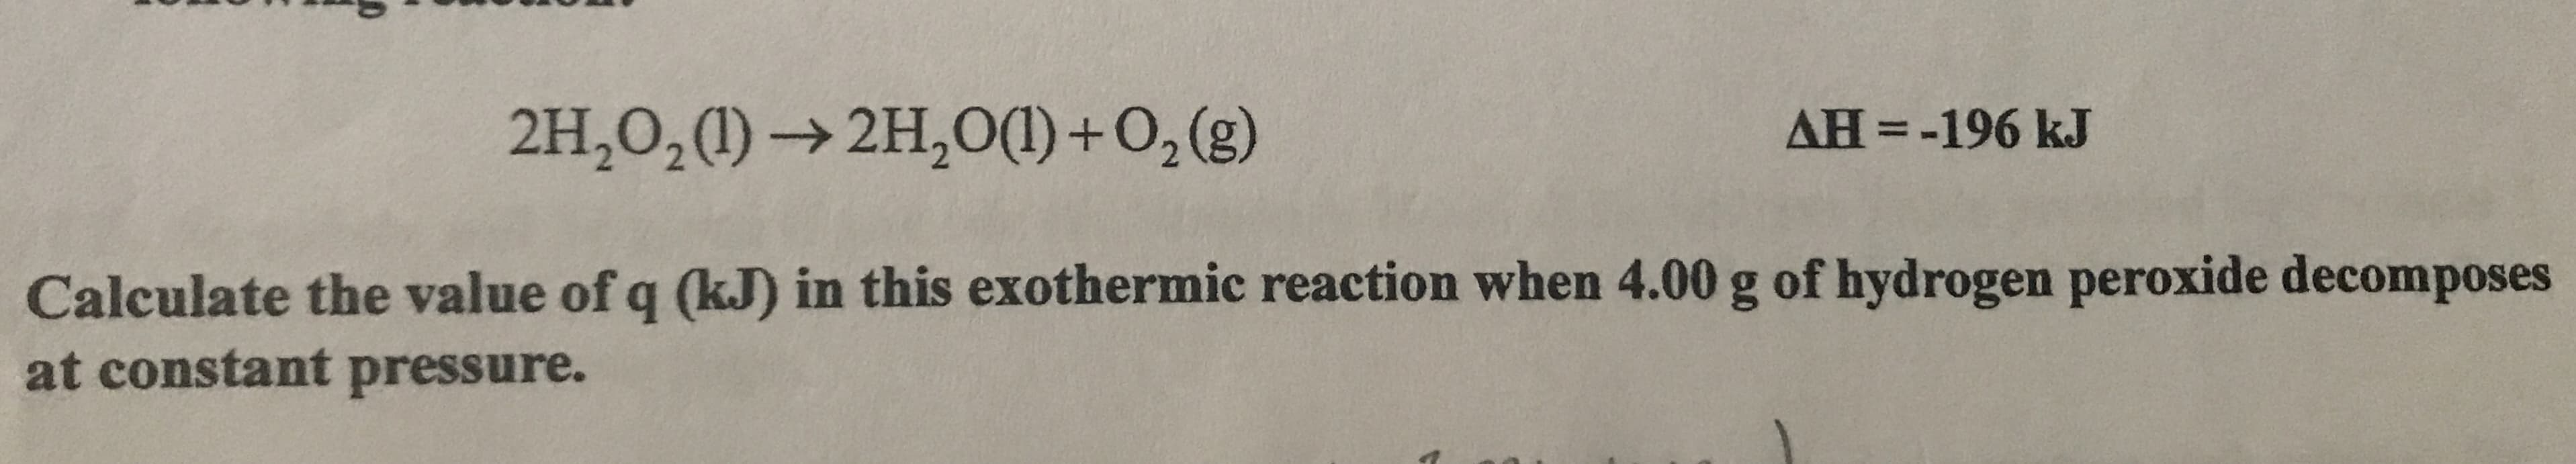 AH =-196 kJ
2H,0,(1) → 2H,O(1) +0,(g)
Calculate the value of q (kJ) in this exothermic reaction when 4.00 g of hydrogen peroxide decomposes
at constant pressure.
